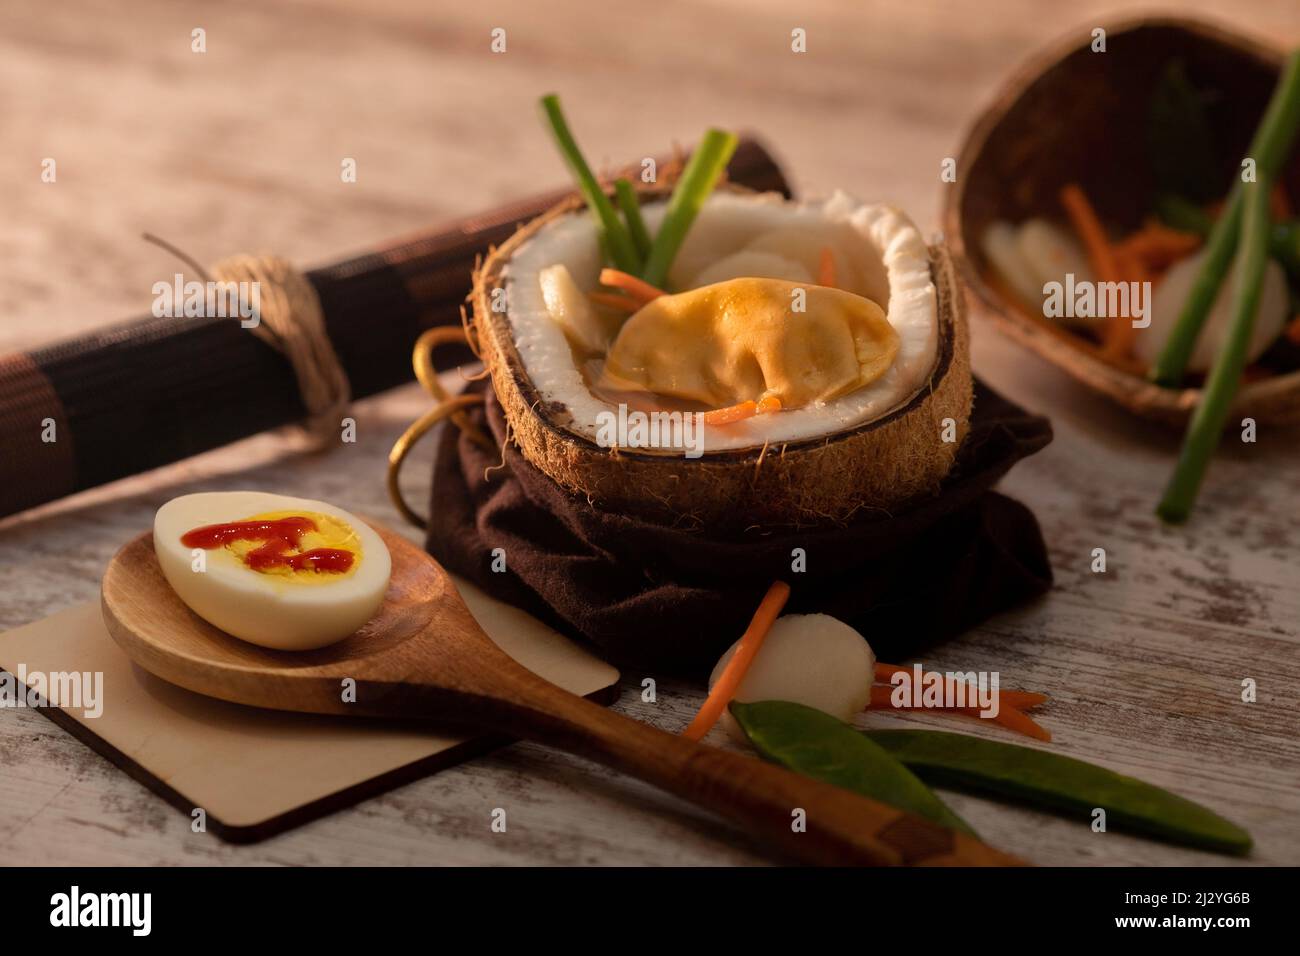 Still life of Pot Sticker Soup with coconut Stock Photo